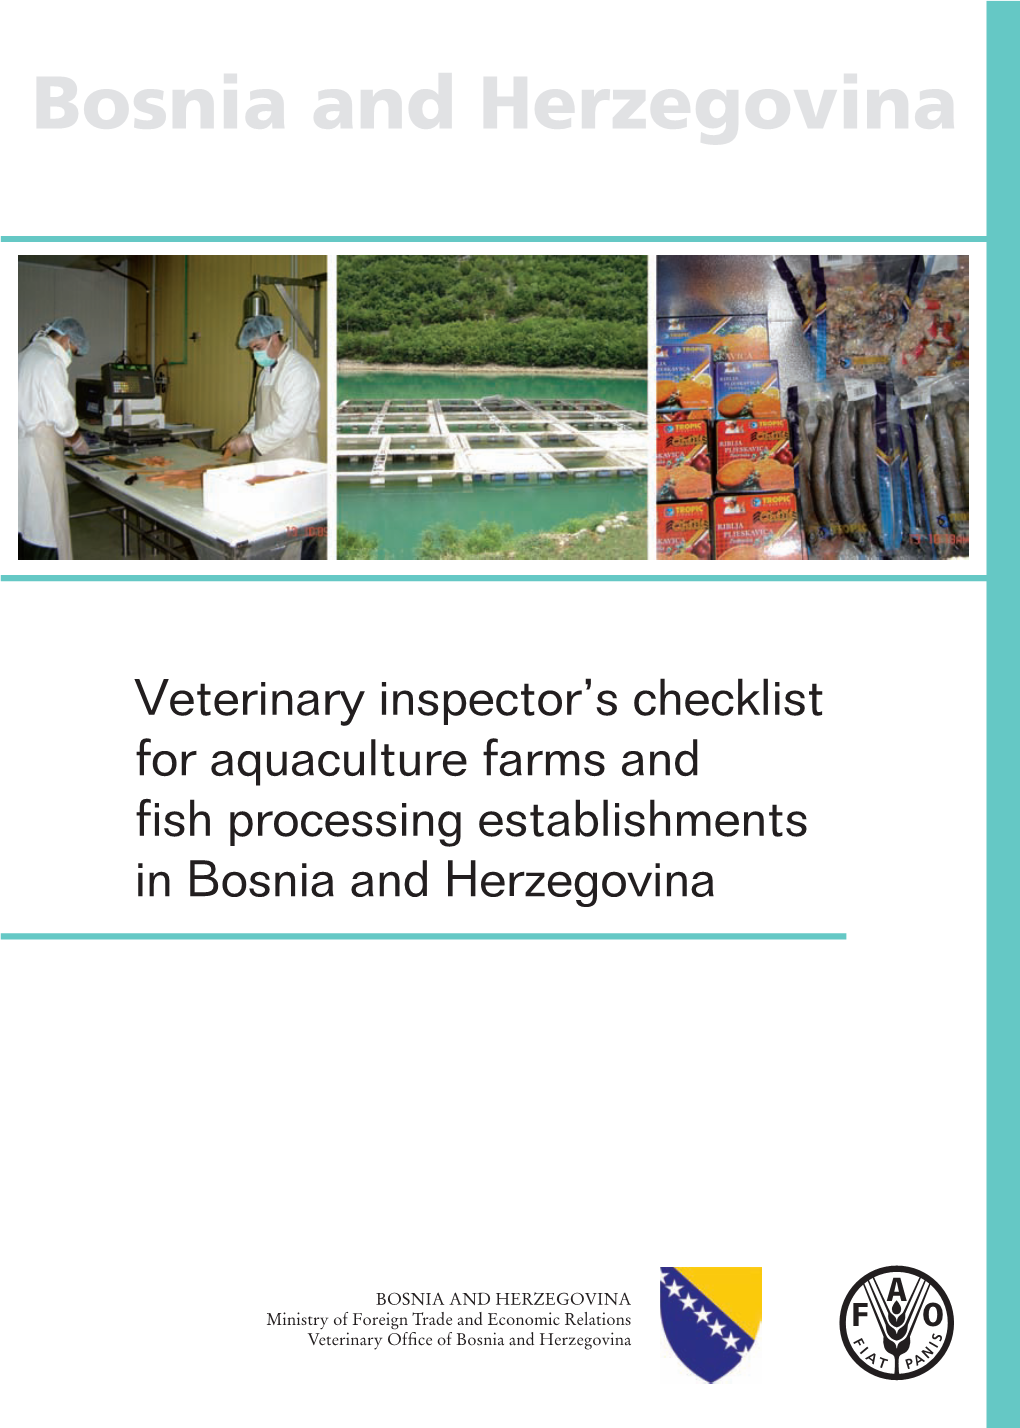 Veterinary Inspector's Checklist for Aquaculture Farms and Fish